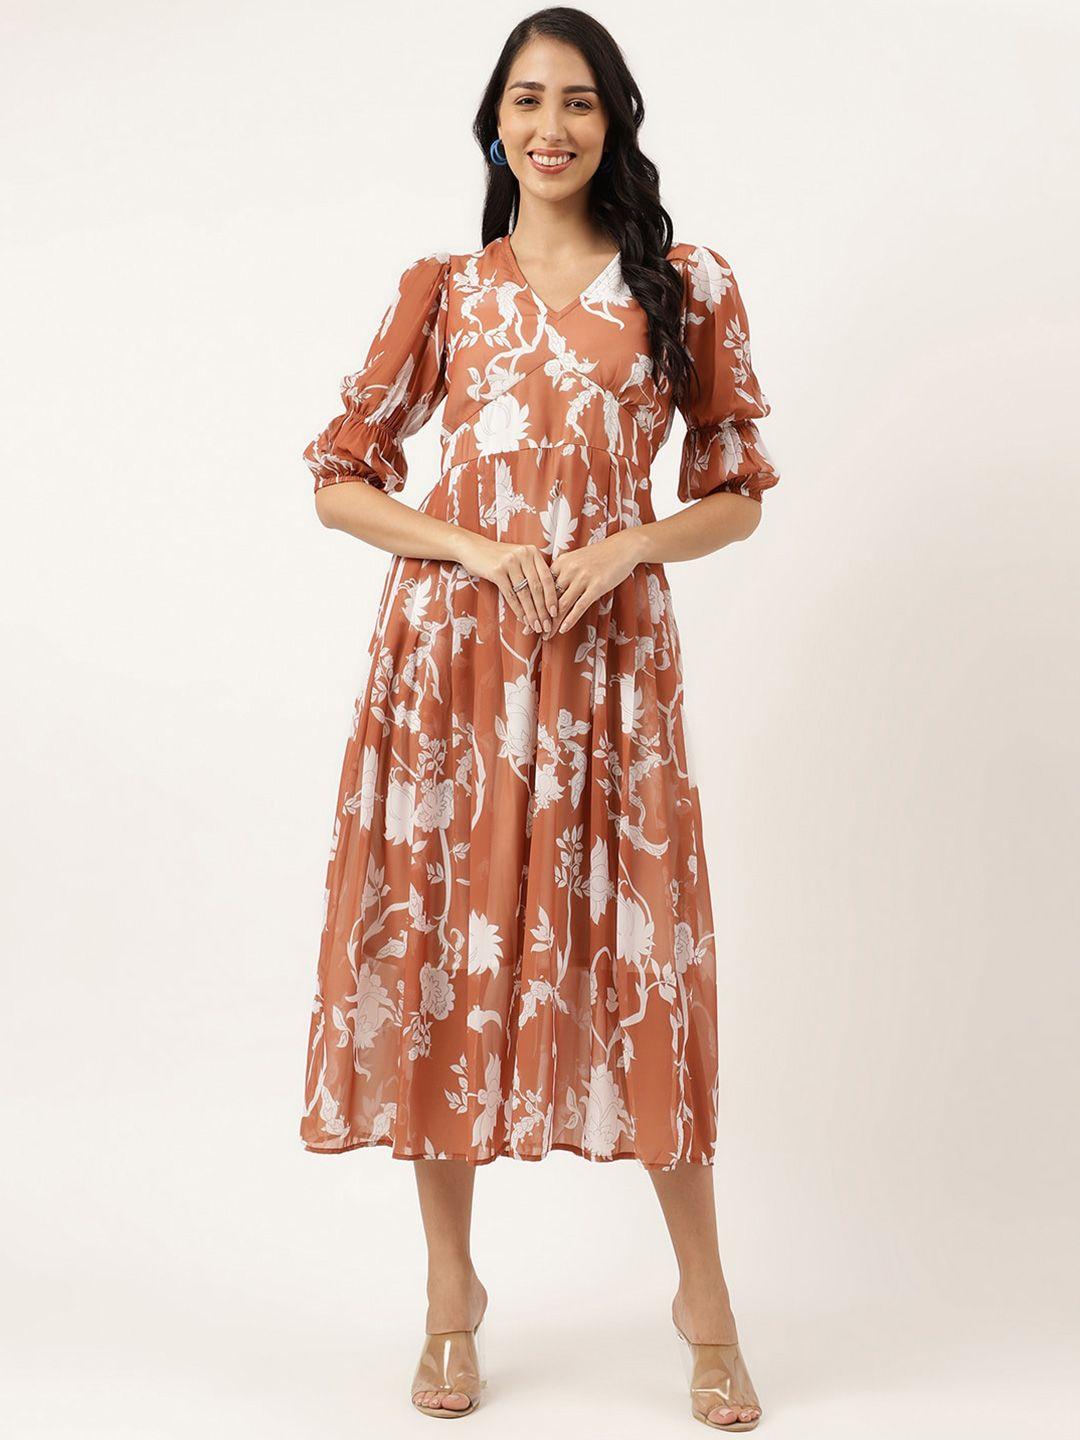 masakali.co-floral-printed-puff-sleeves-georgette-empire-midi-dress